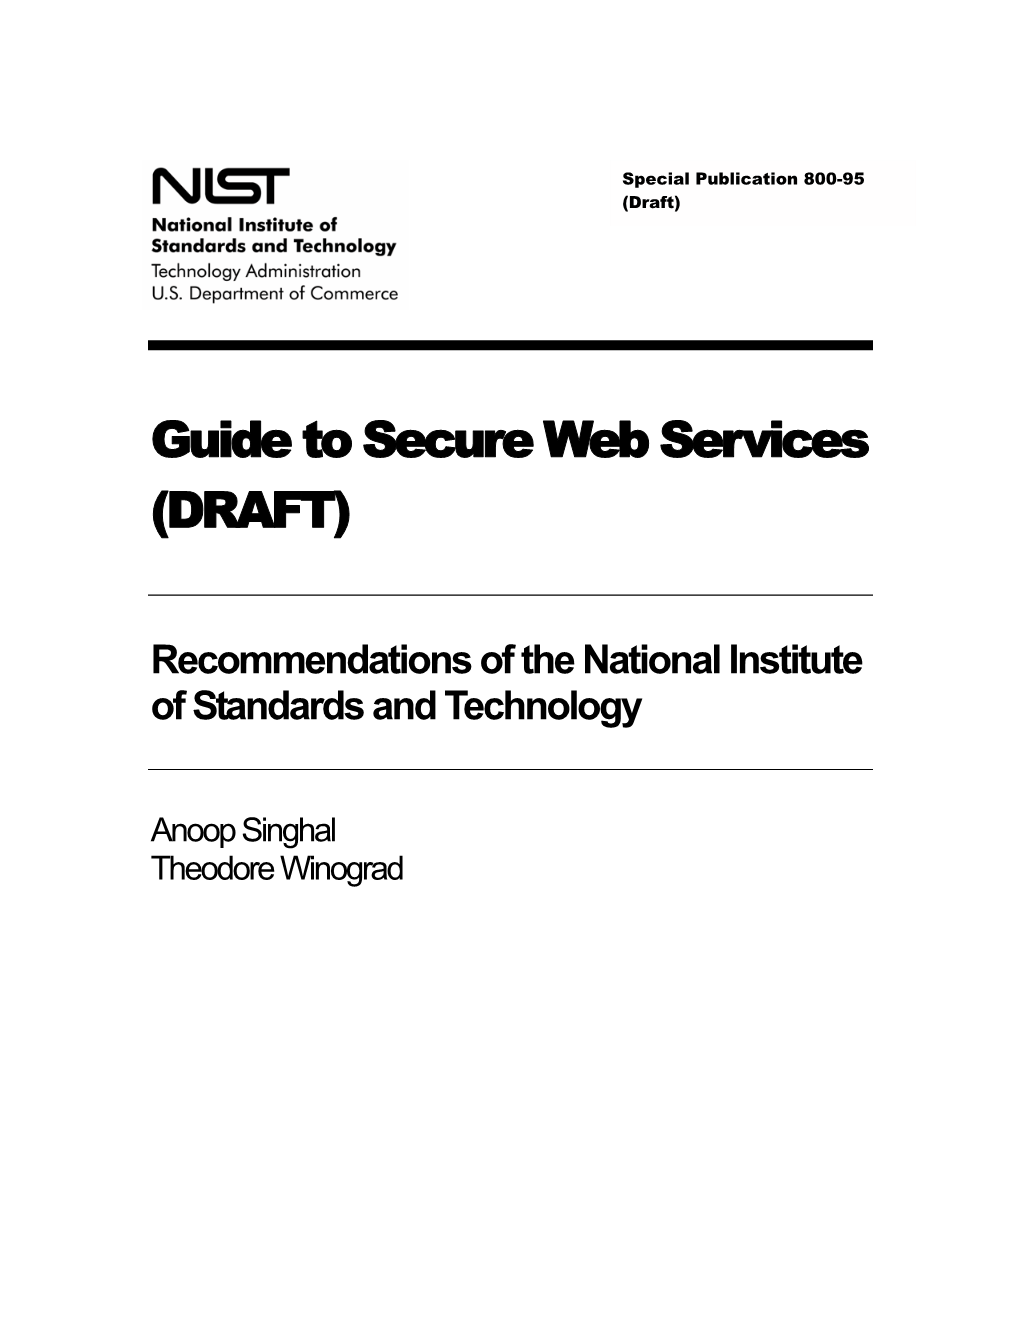 NIST 800-95 Guide to Web Services Security